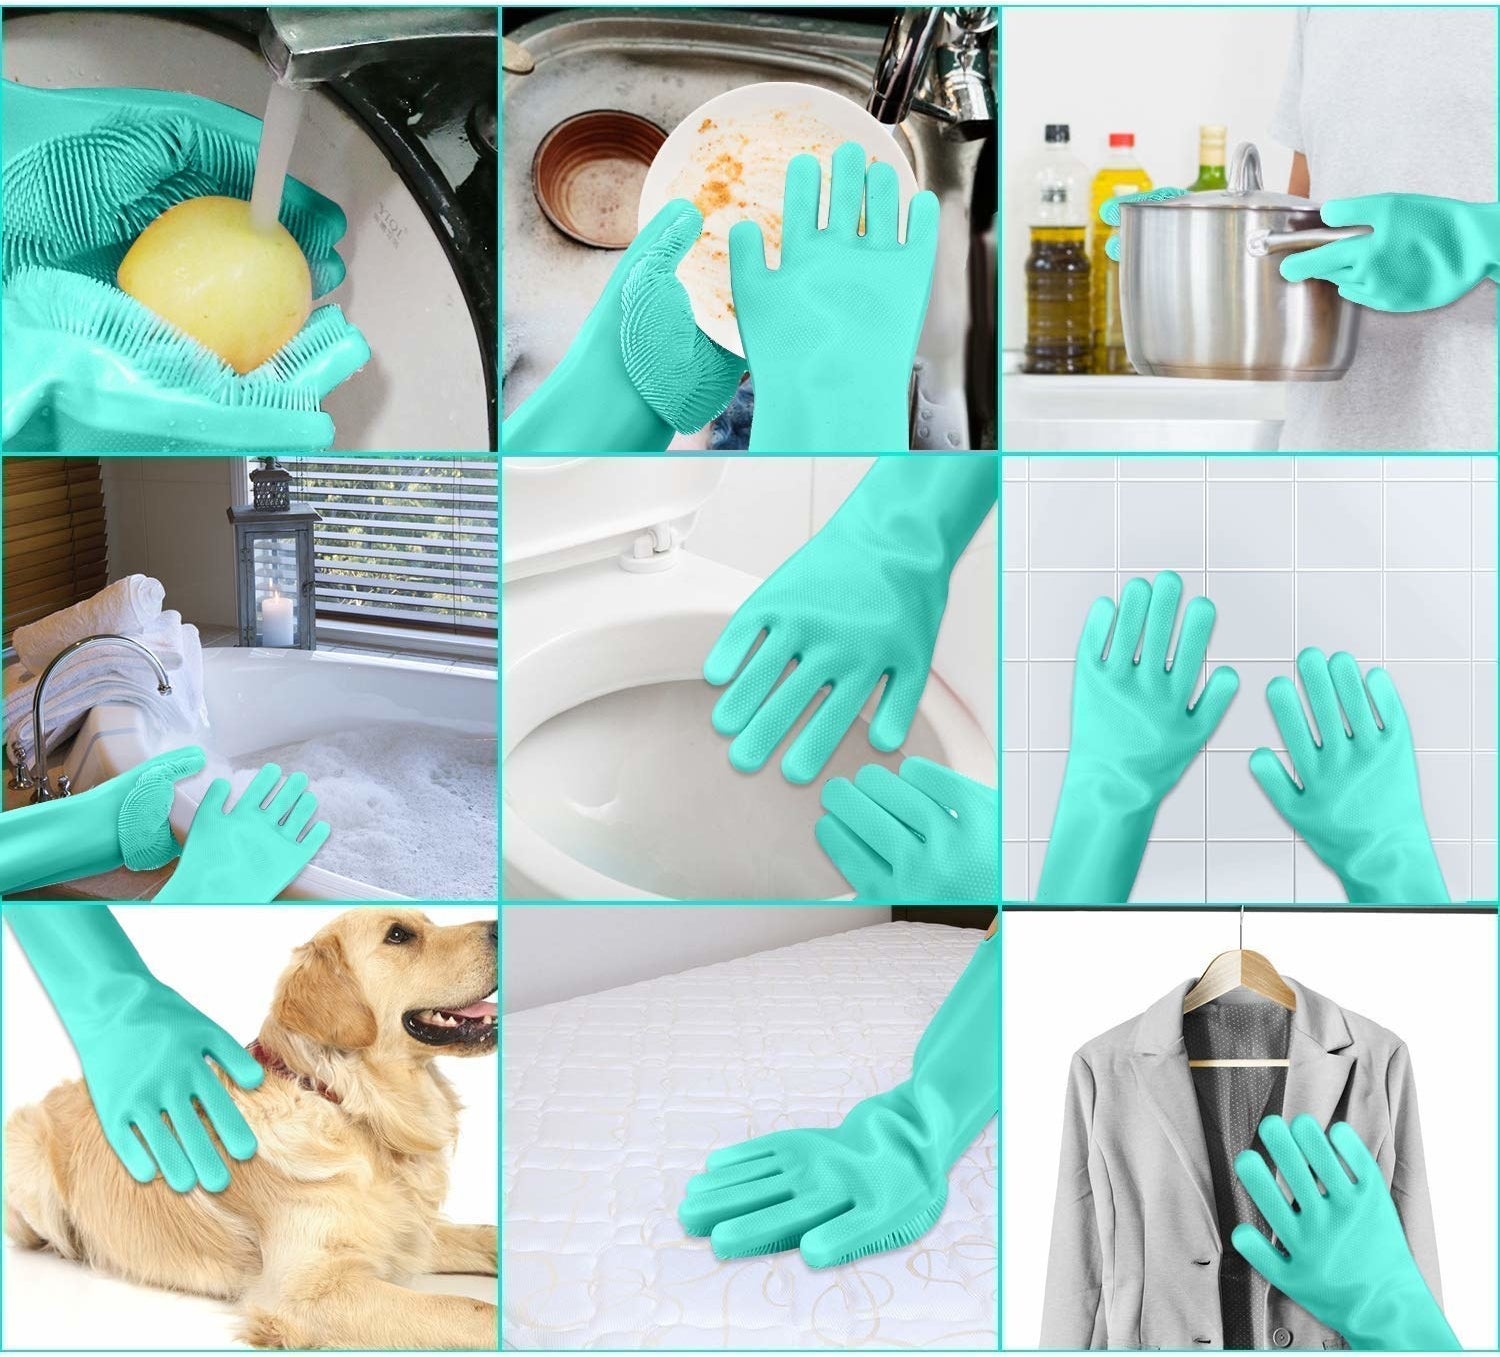 Images showing different uses of a pair of silicone brush gloves.